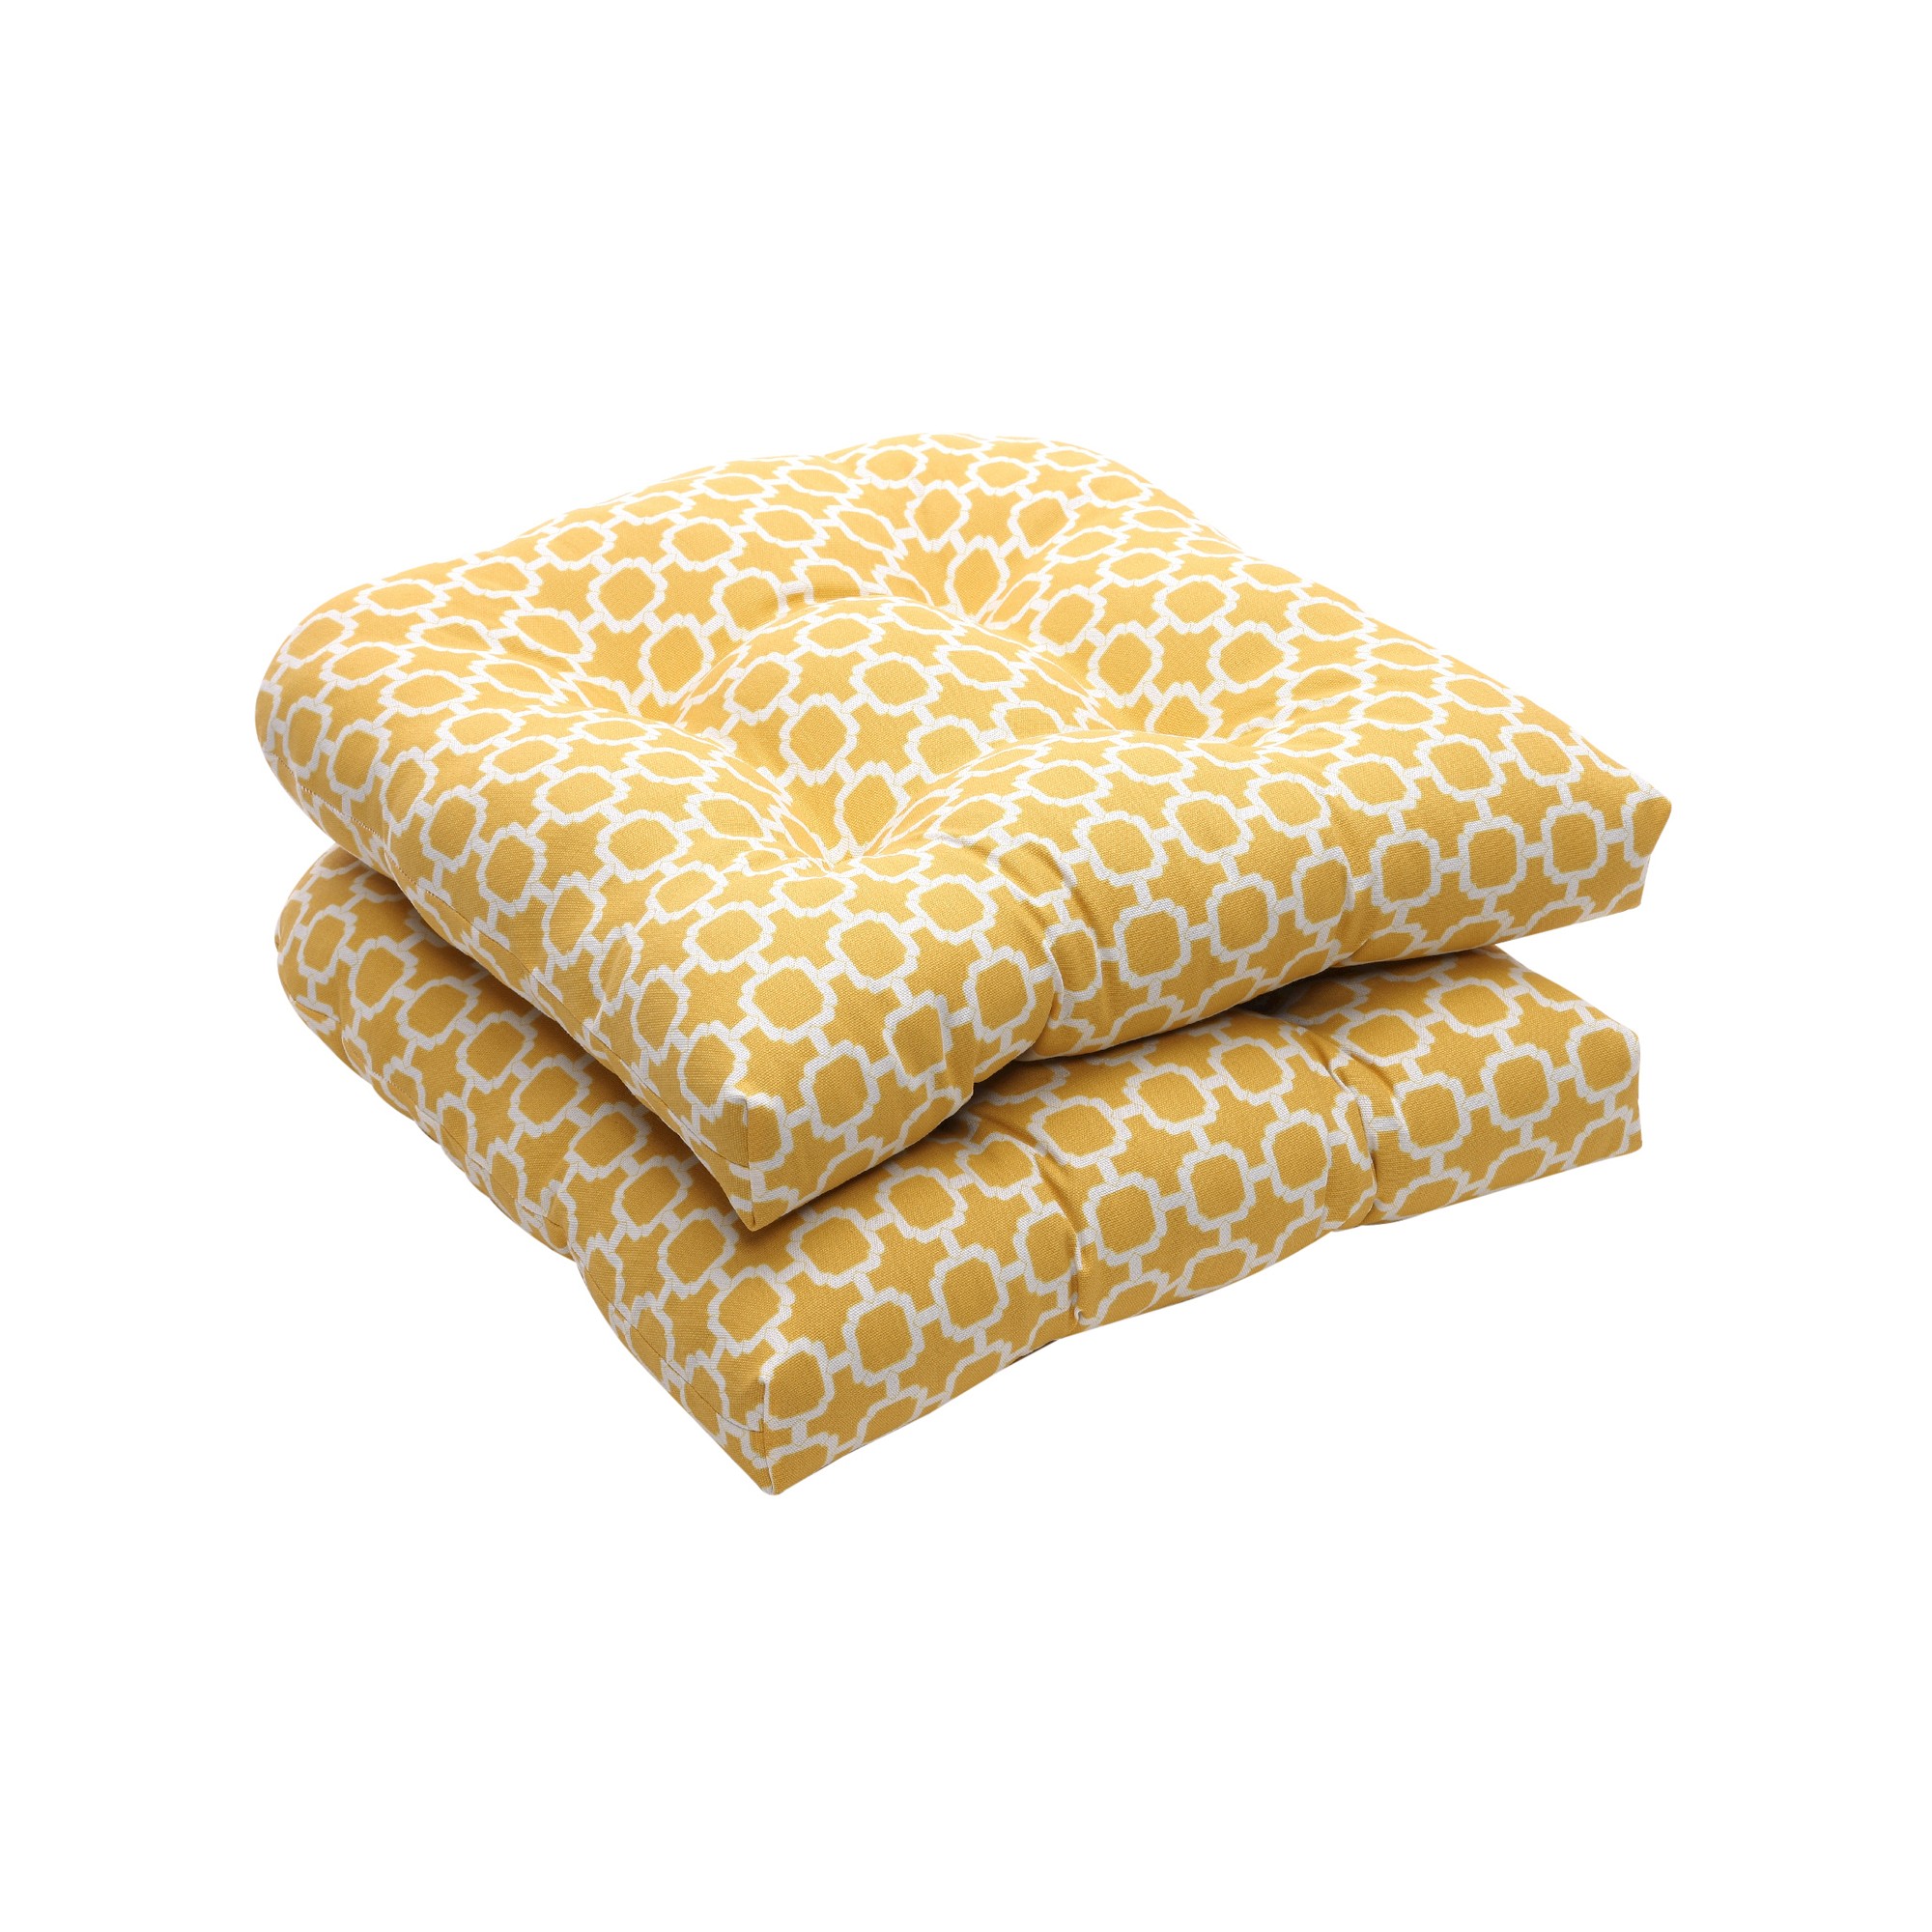 Outdoor 2 Pc Wicker Chair Cushion Set - Yellow/White Geometric - Pillow Perfect